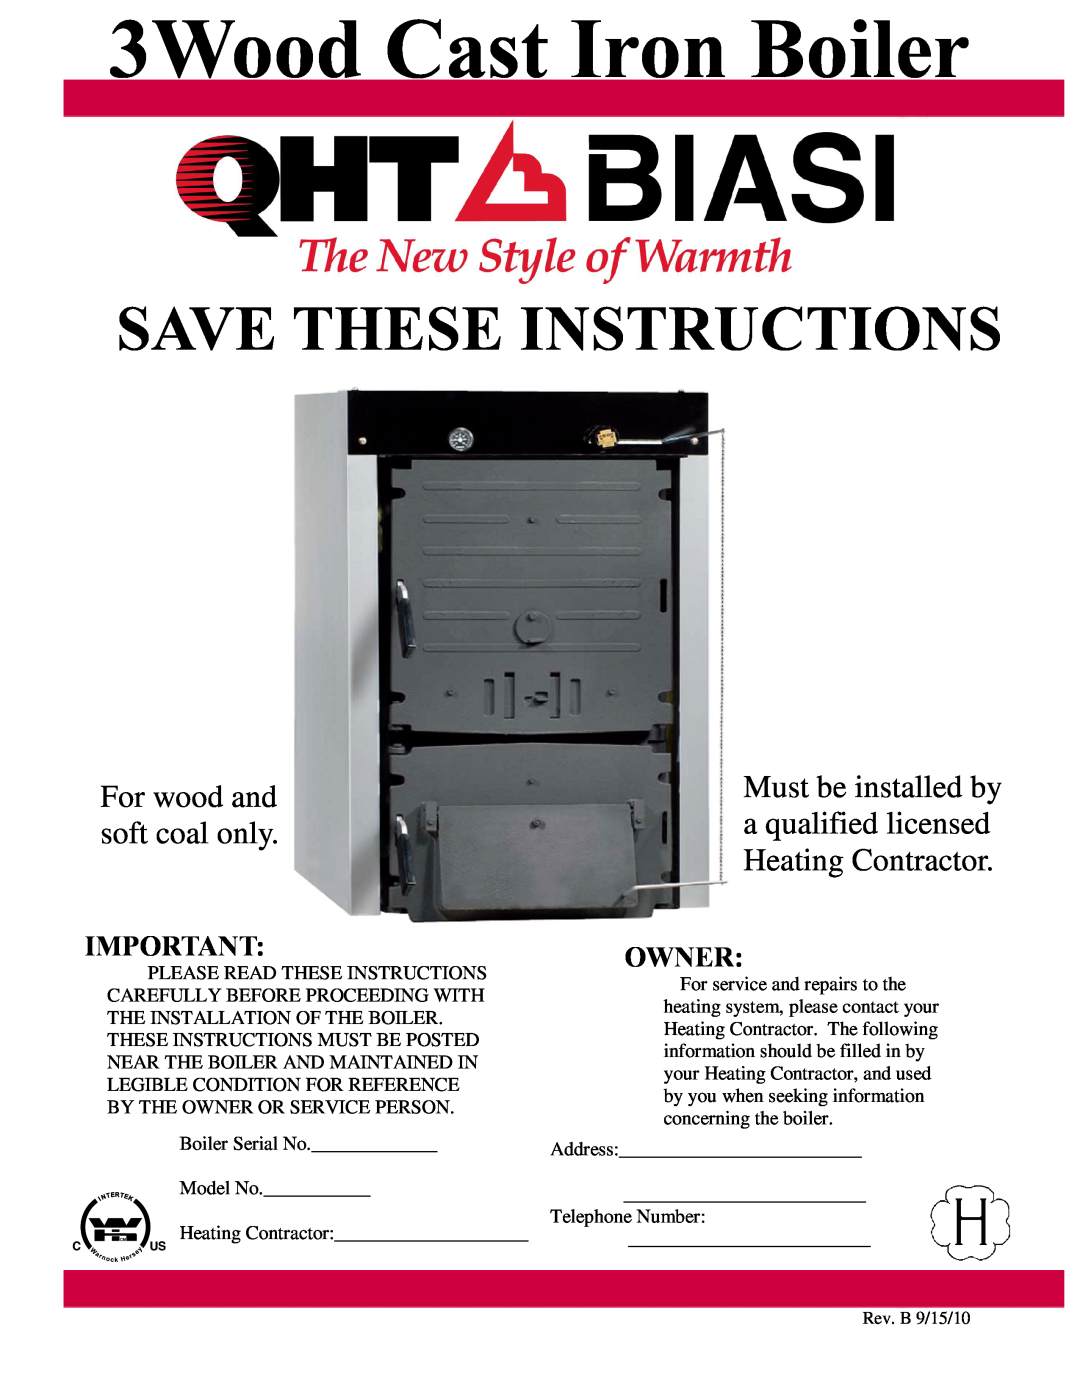 QHT manual 3Wood Cast Iron Boiler, Save These Instructions, For wood and soft coal only, Boiler Serial No 